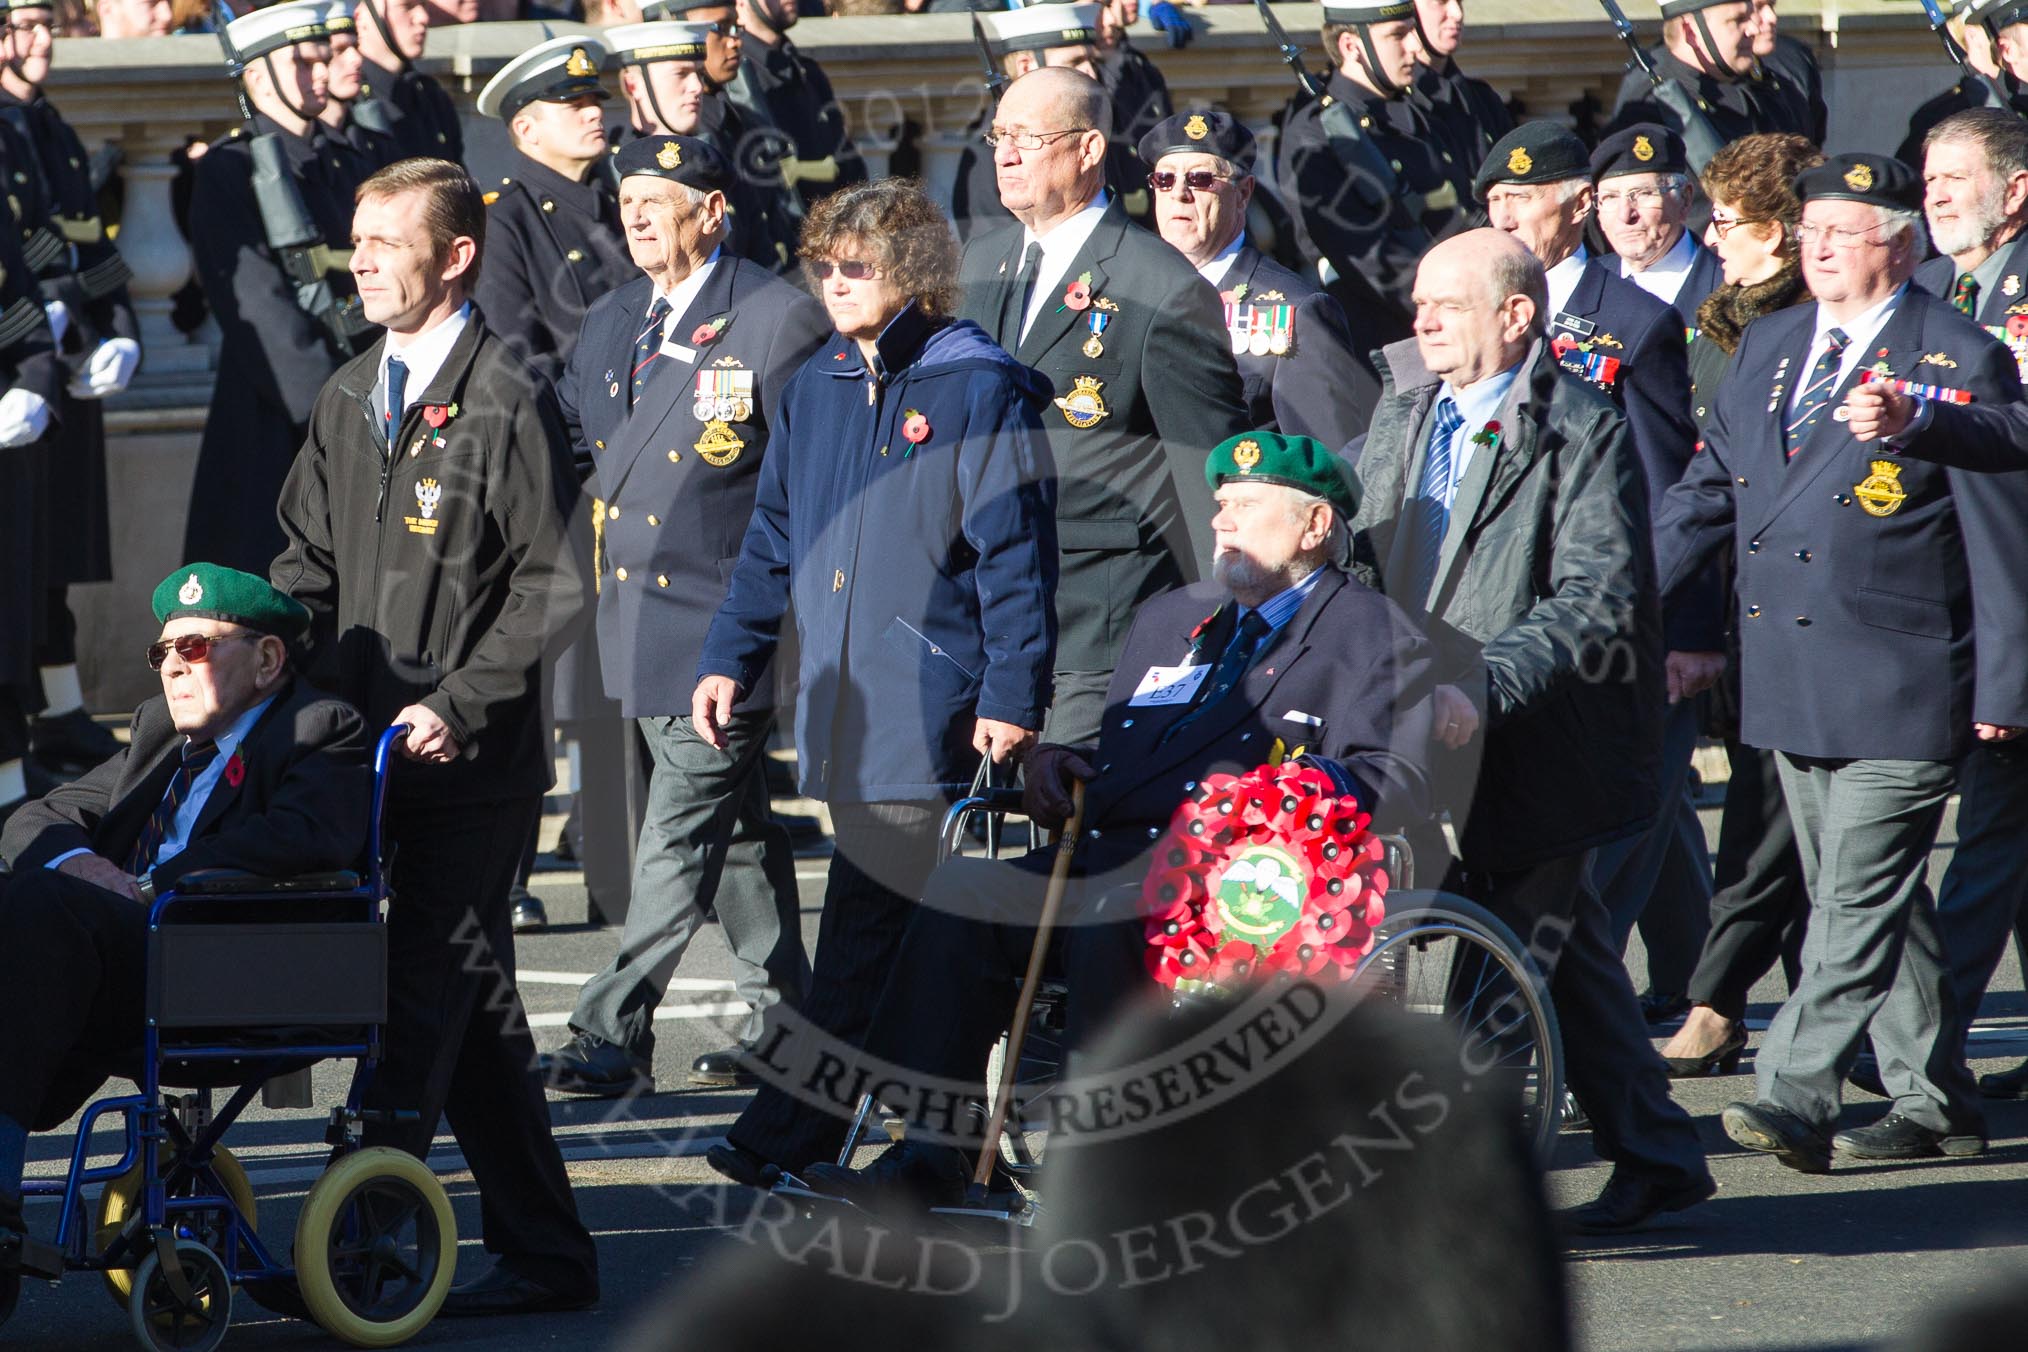 Remembrance Sunday 2012 Cenotaph March Past: Group E37 - Special Boat Service Association..
Whitehall, Cenotaph,
London SW1,

United Kingdom,
on 11 November 2012 at 11:42, image #270